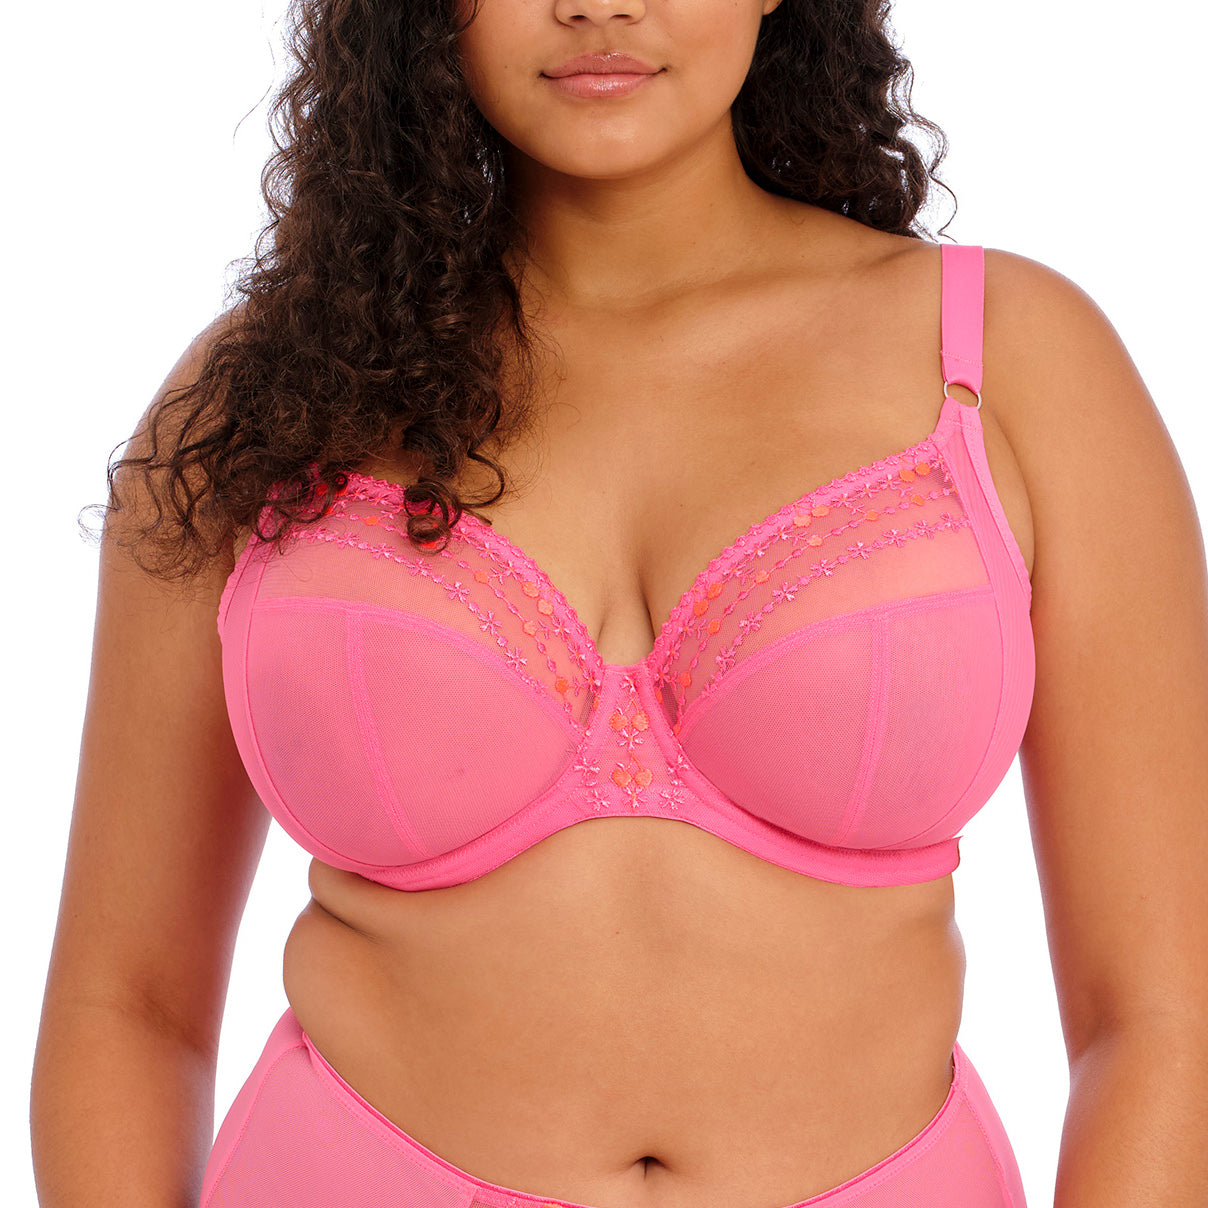 Elomi rose colored Demi cup underwire bra. Size 38 K US ( 38 H UK)